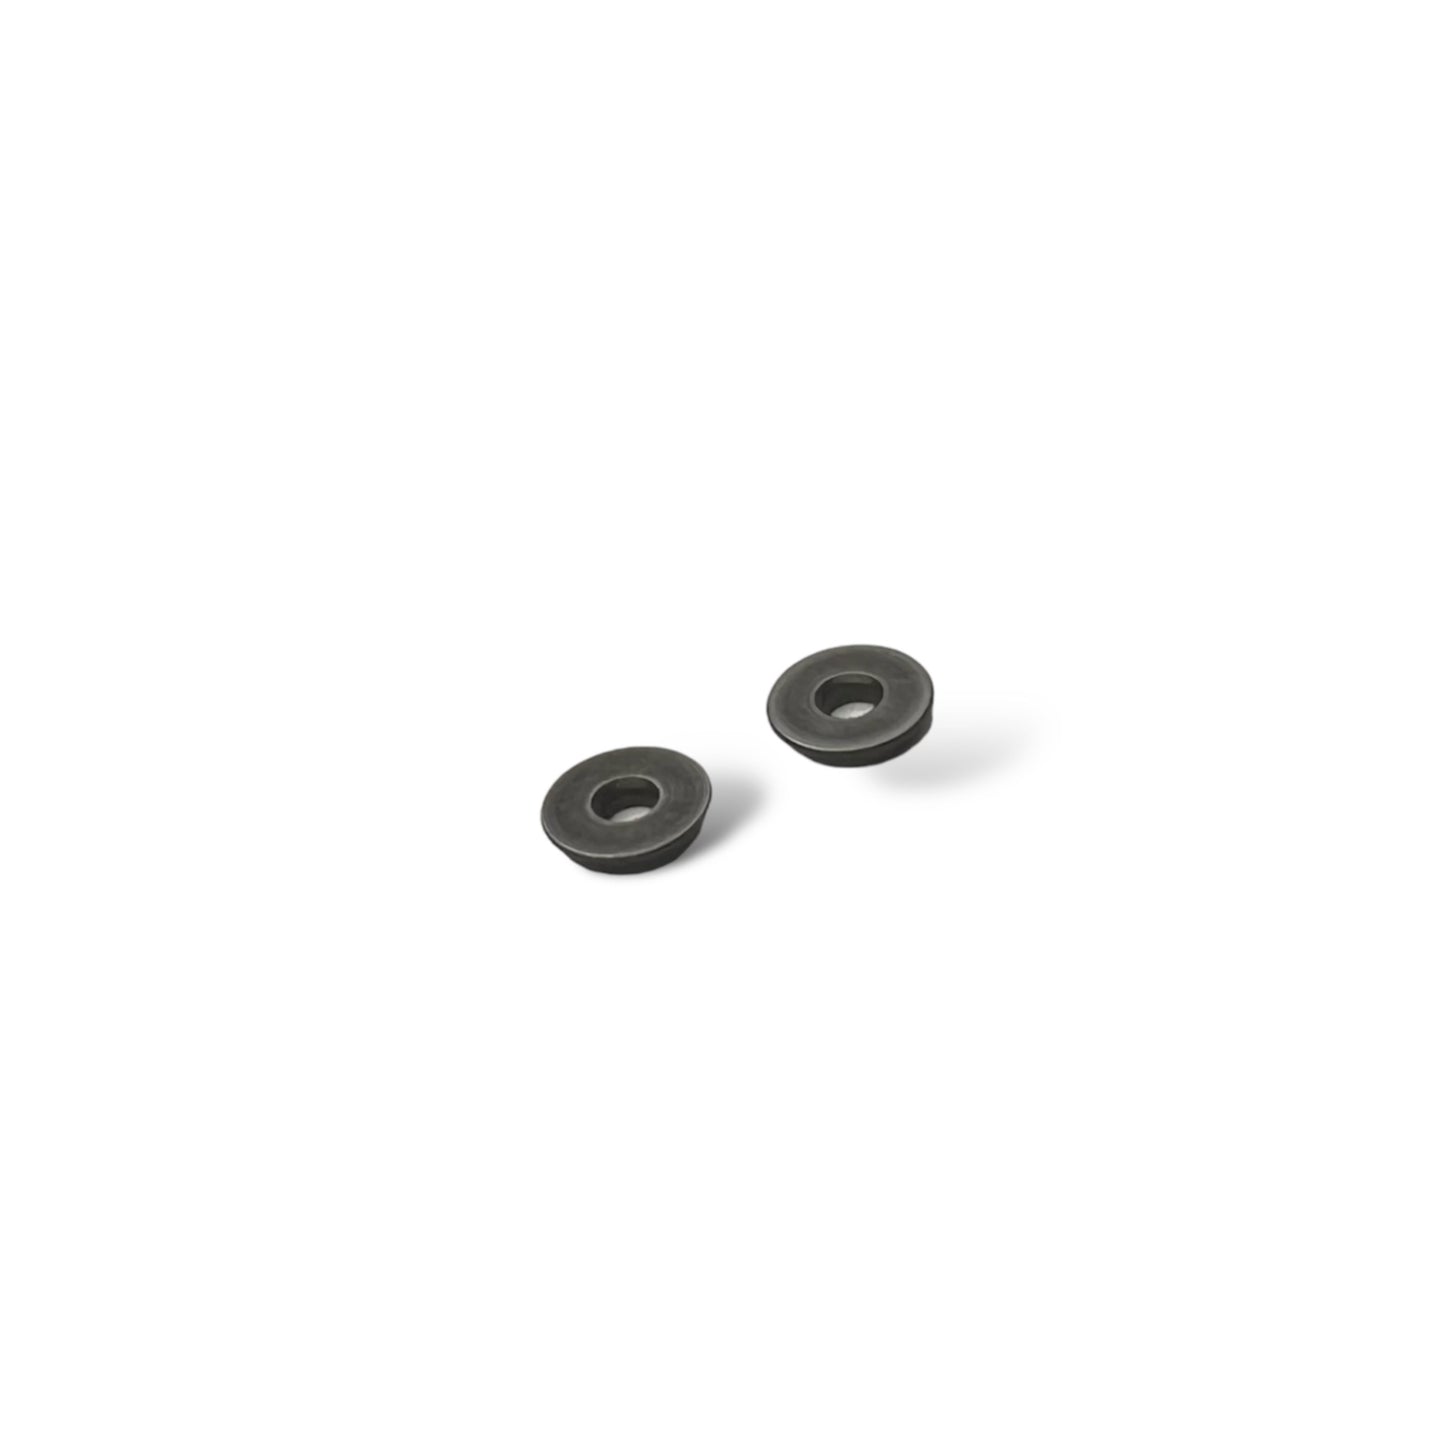 The Real Deal Airsoft 8mm Low Profile Bushings CNC